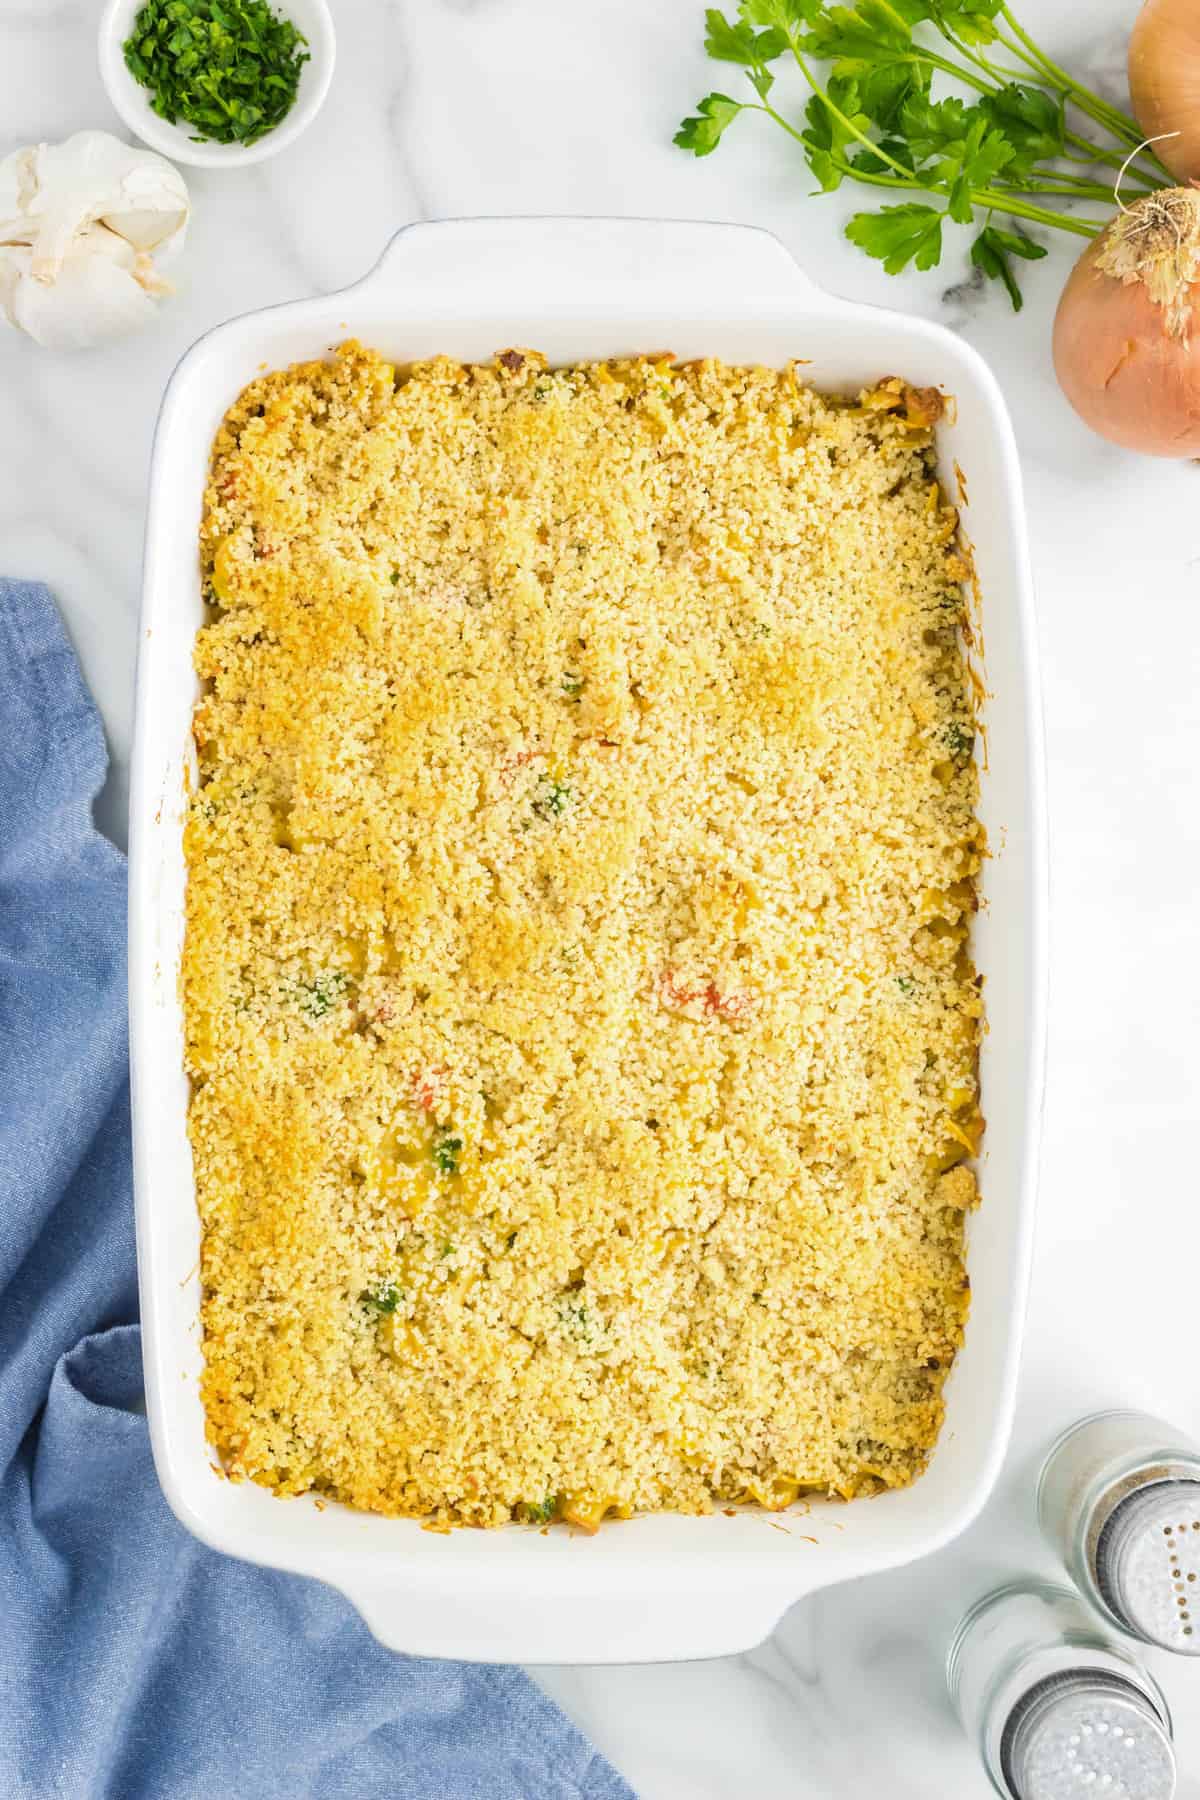 Baked Chicken Noodle Casserole Just out of the Oven in the Baking Dish